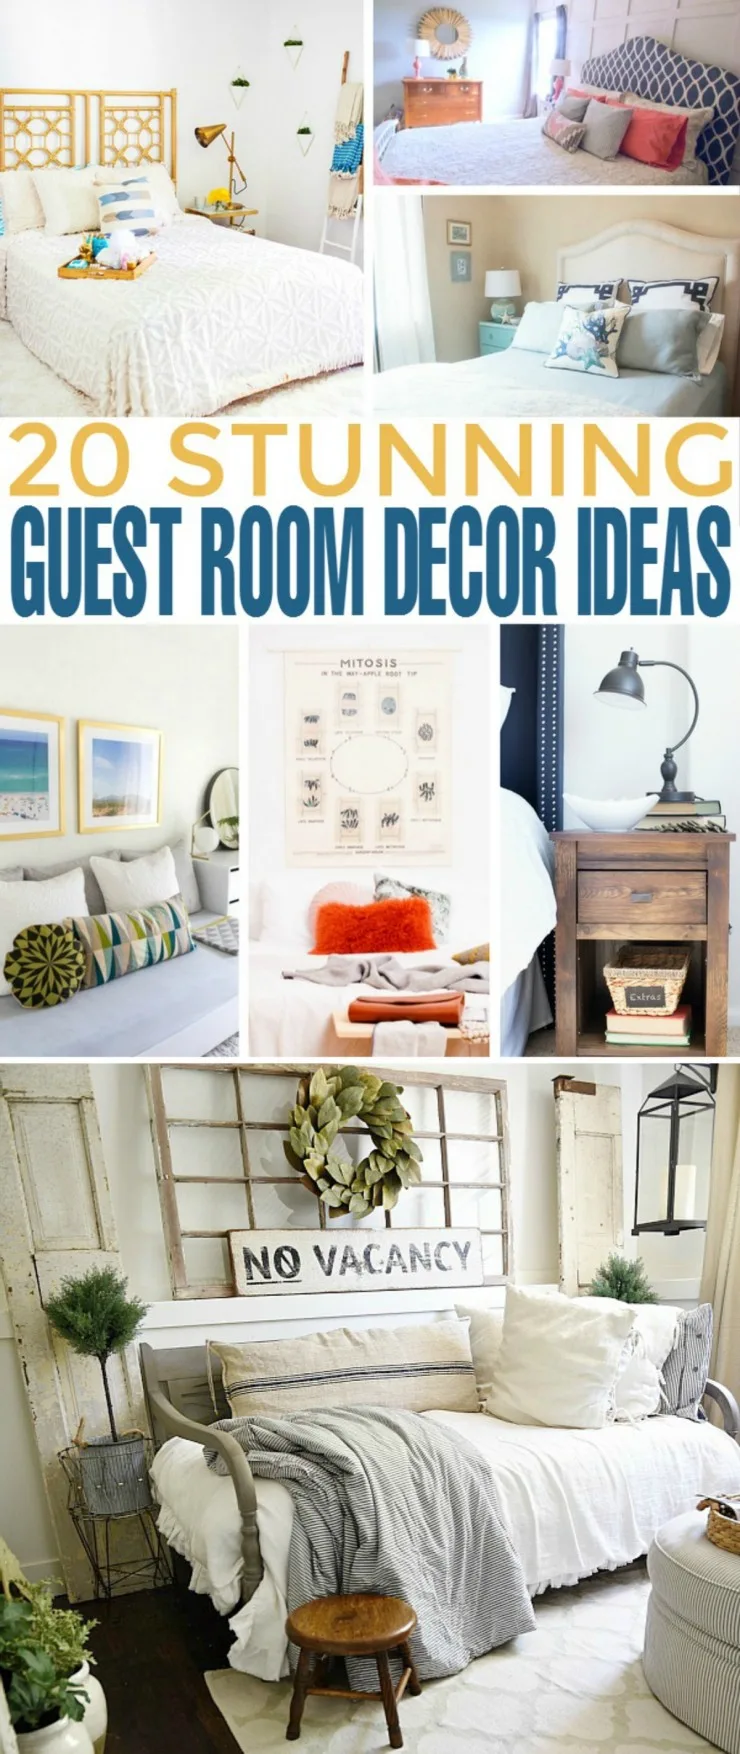 If you ever considered redecorating your guest room, I have some inspirational posts to get you started. These wonderful bloggers have come up with creative guest room decor ideas which are also budget-friendly. So as long as you're willing to put in some effort you will end up having an awe-inspiring guest room in no time!